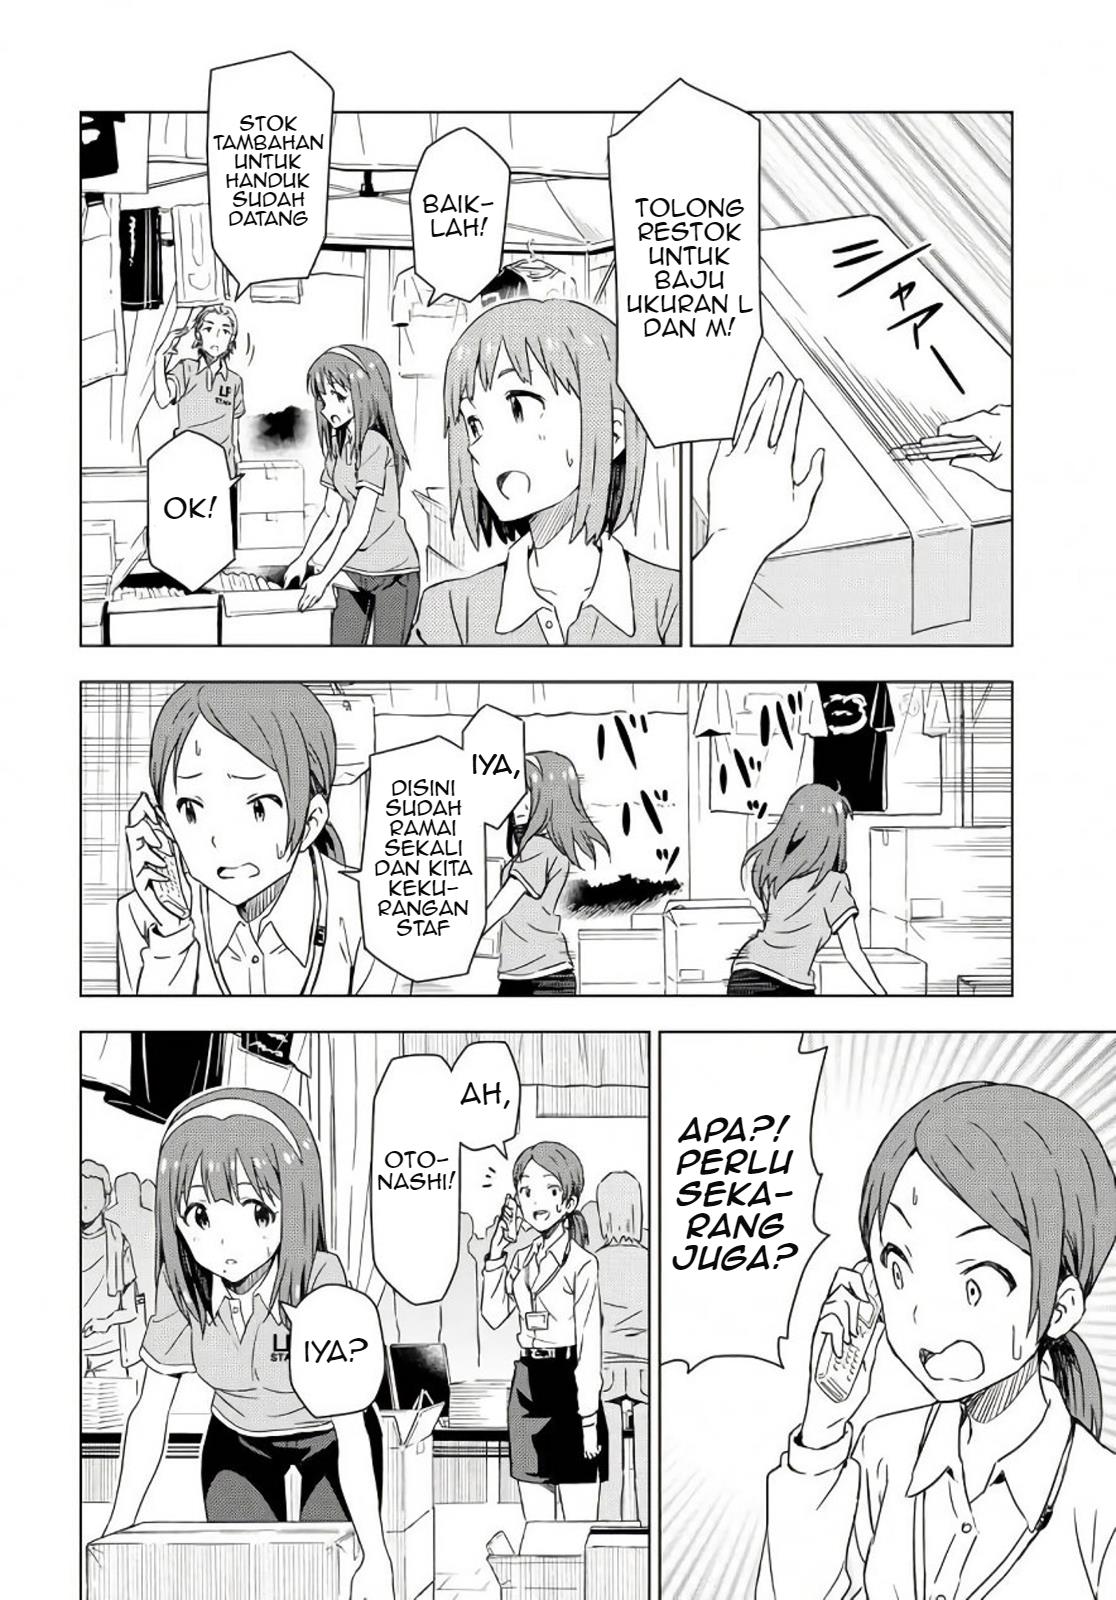 Morning Glow is Golden: The IDOLM@STER Chapter 7